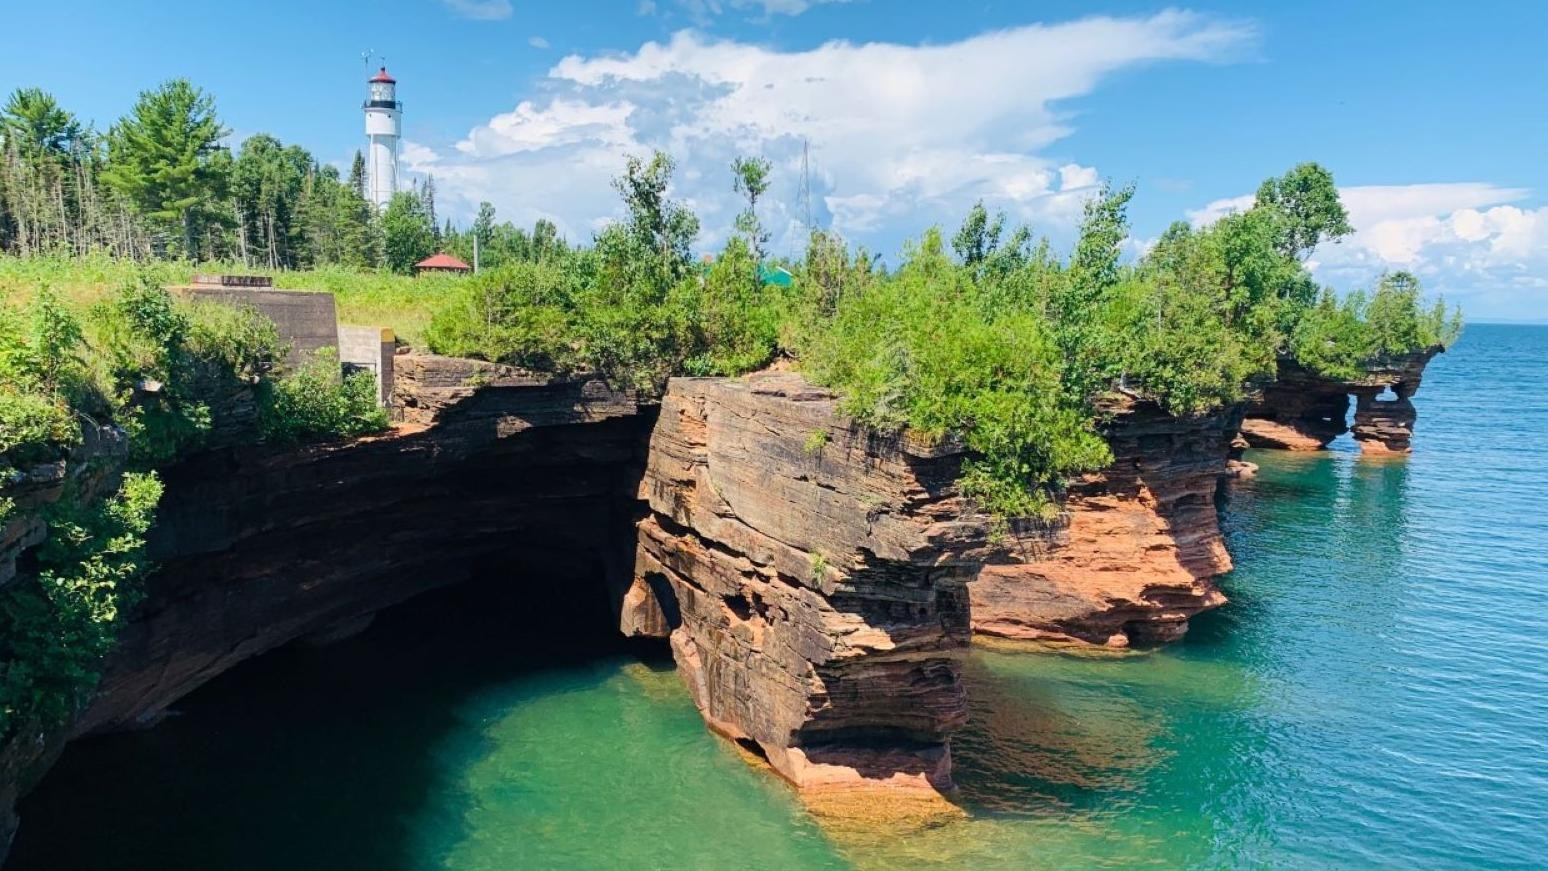 Brown sandstone cliffs covered with trees protrude out into the water with a lighthouse on top. 